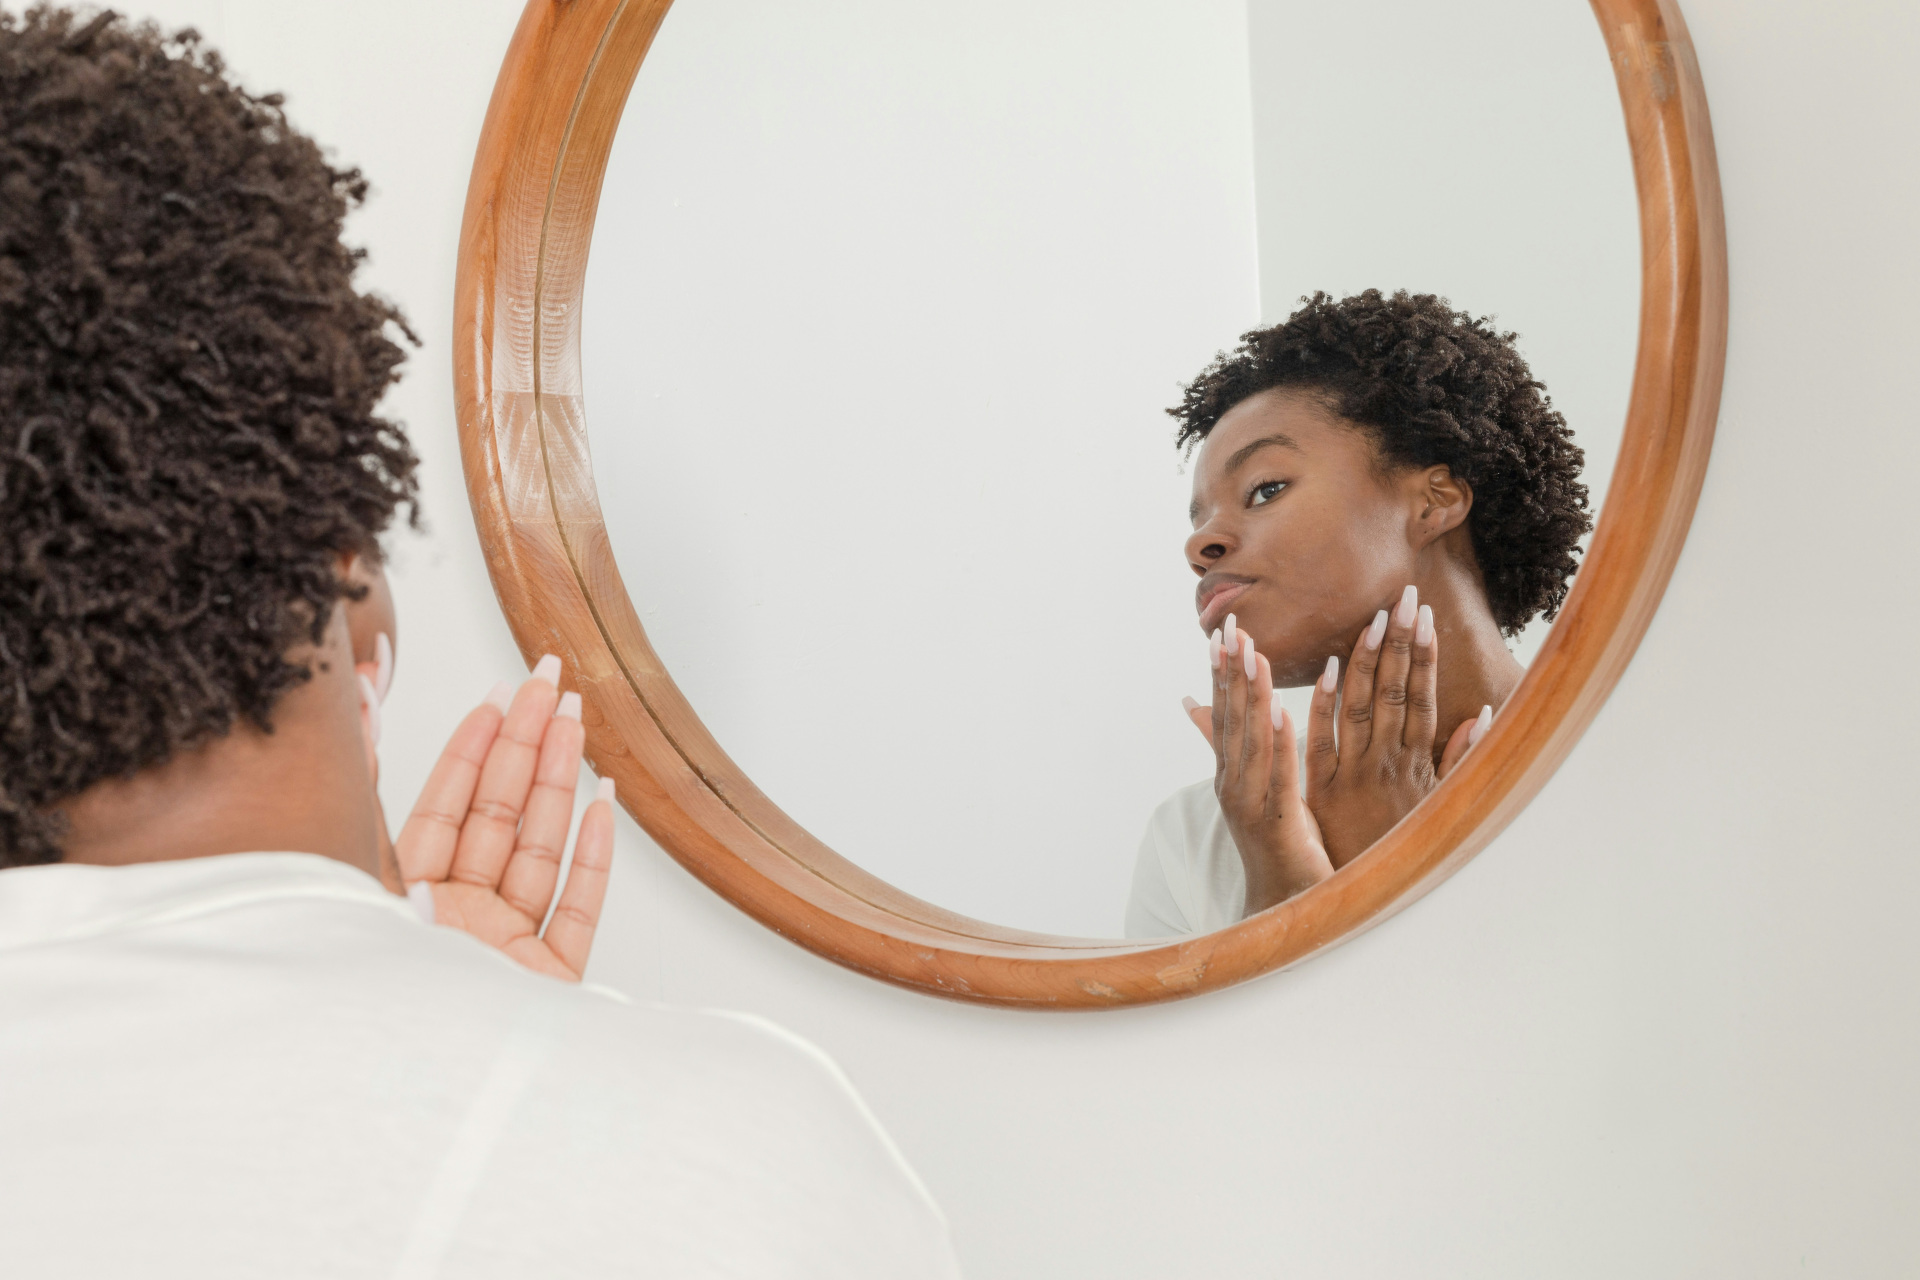 Woman looking in mirror touching face